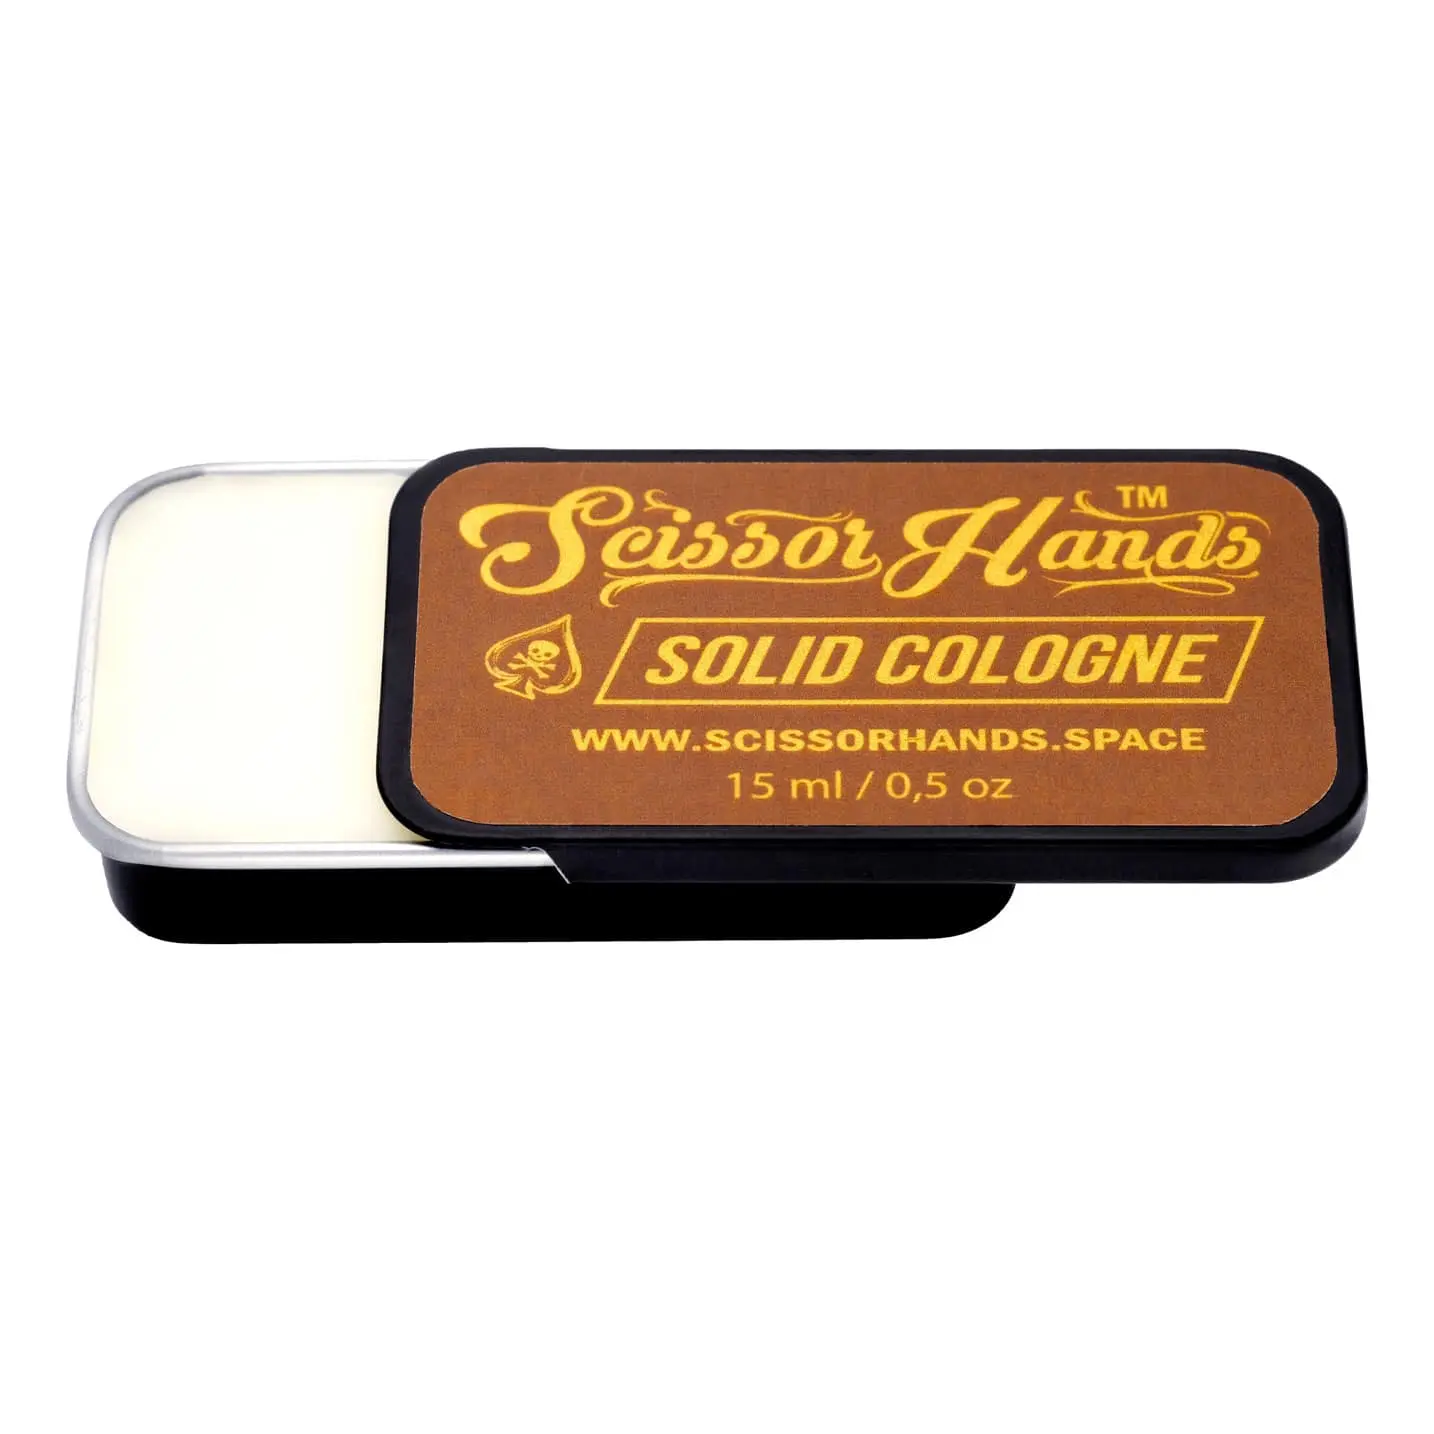 Solid cologne Brown